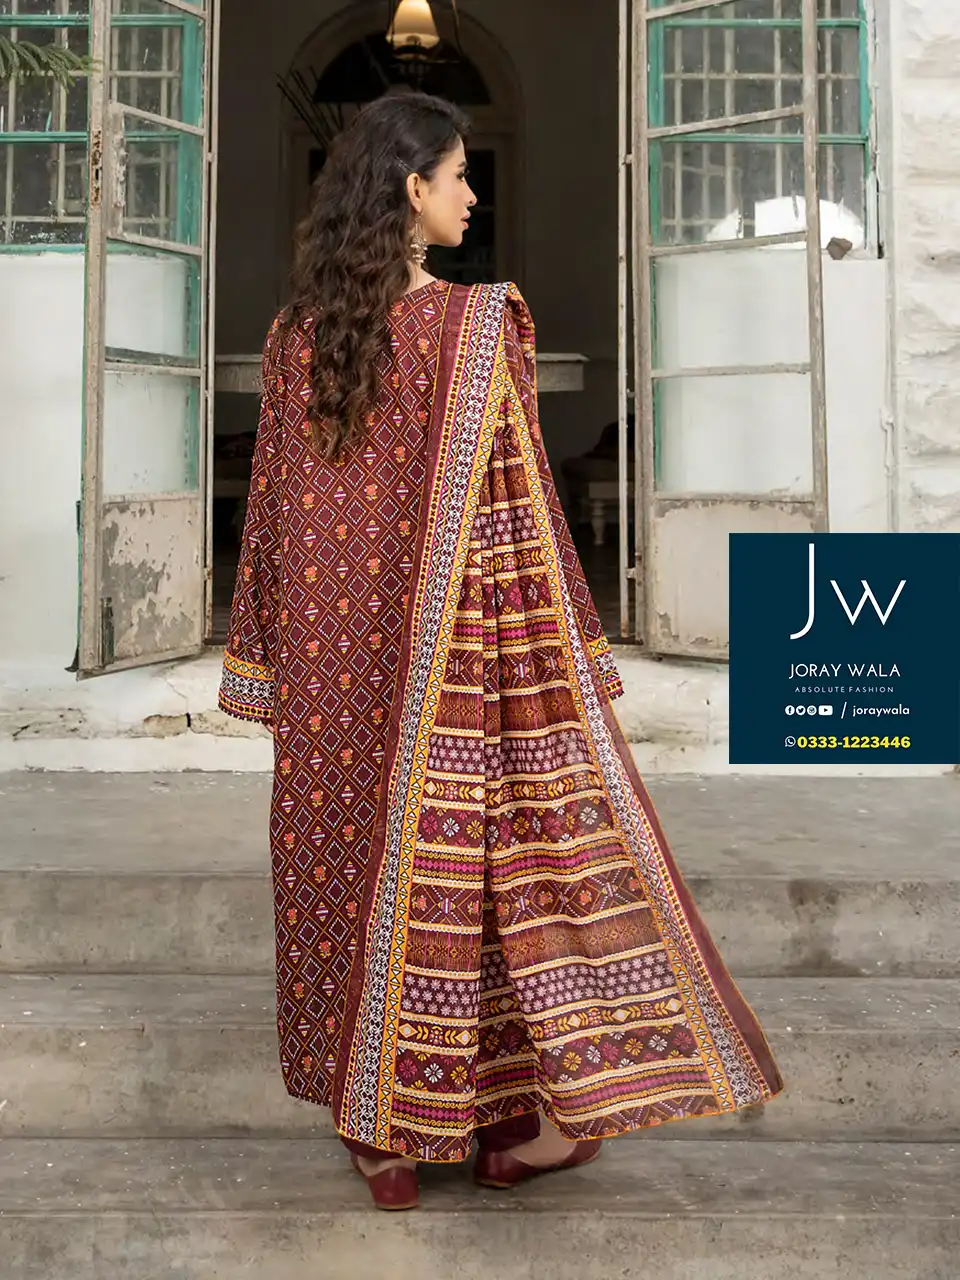 Zesh Summer Printed Lawn 2024 D2 available with free delivery at joraywala. 100% Original.